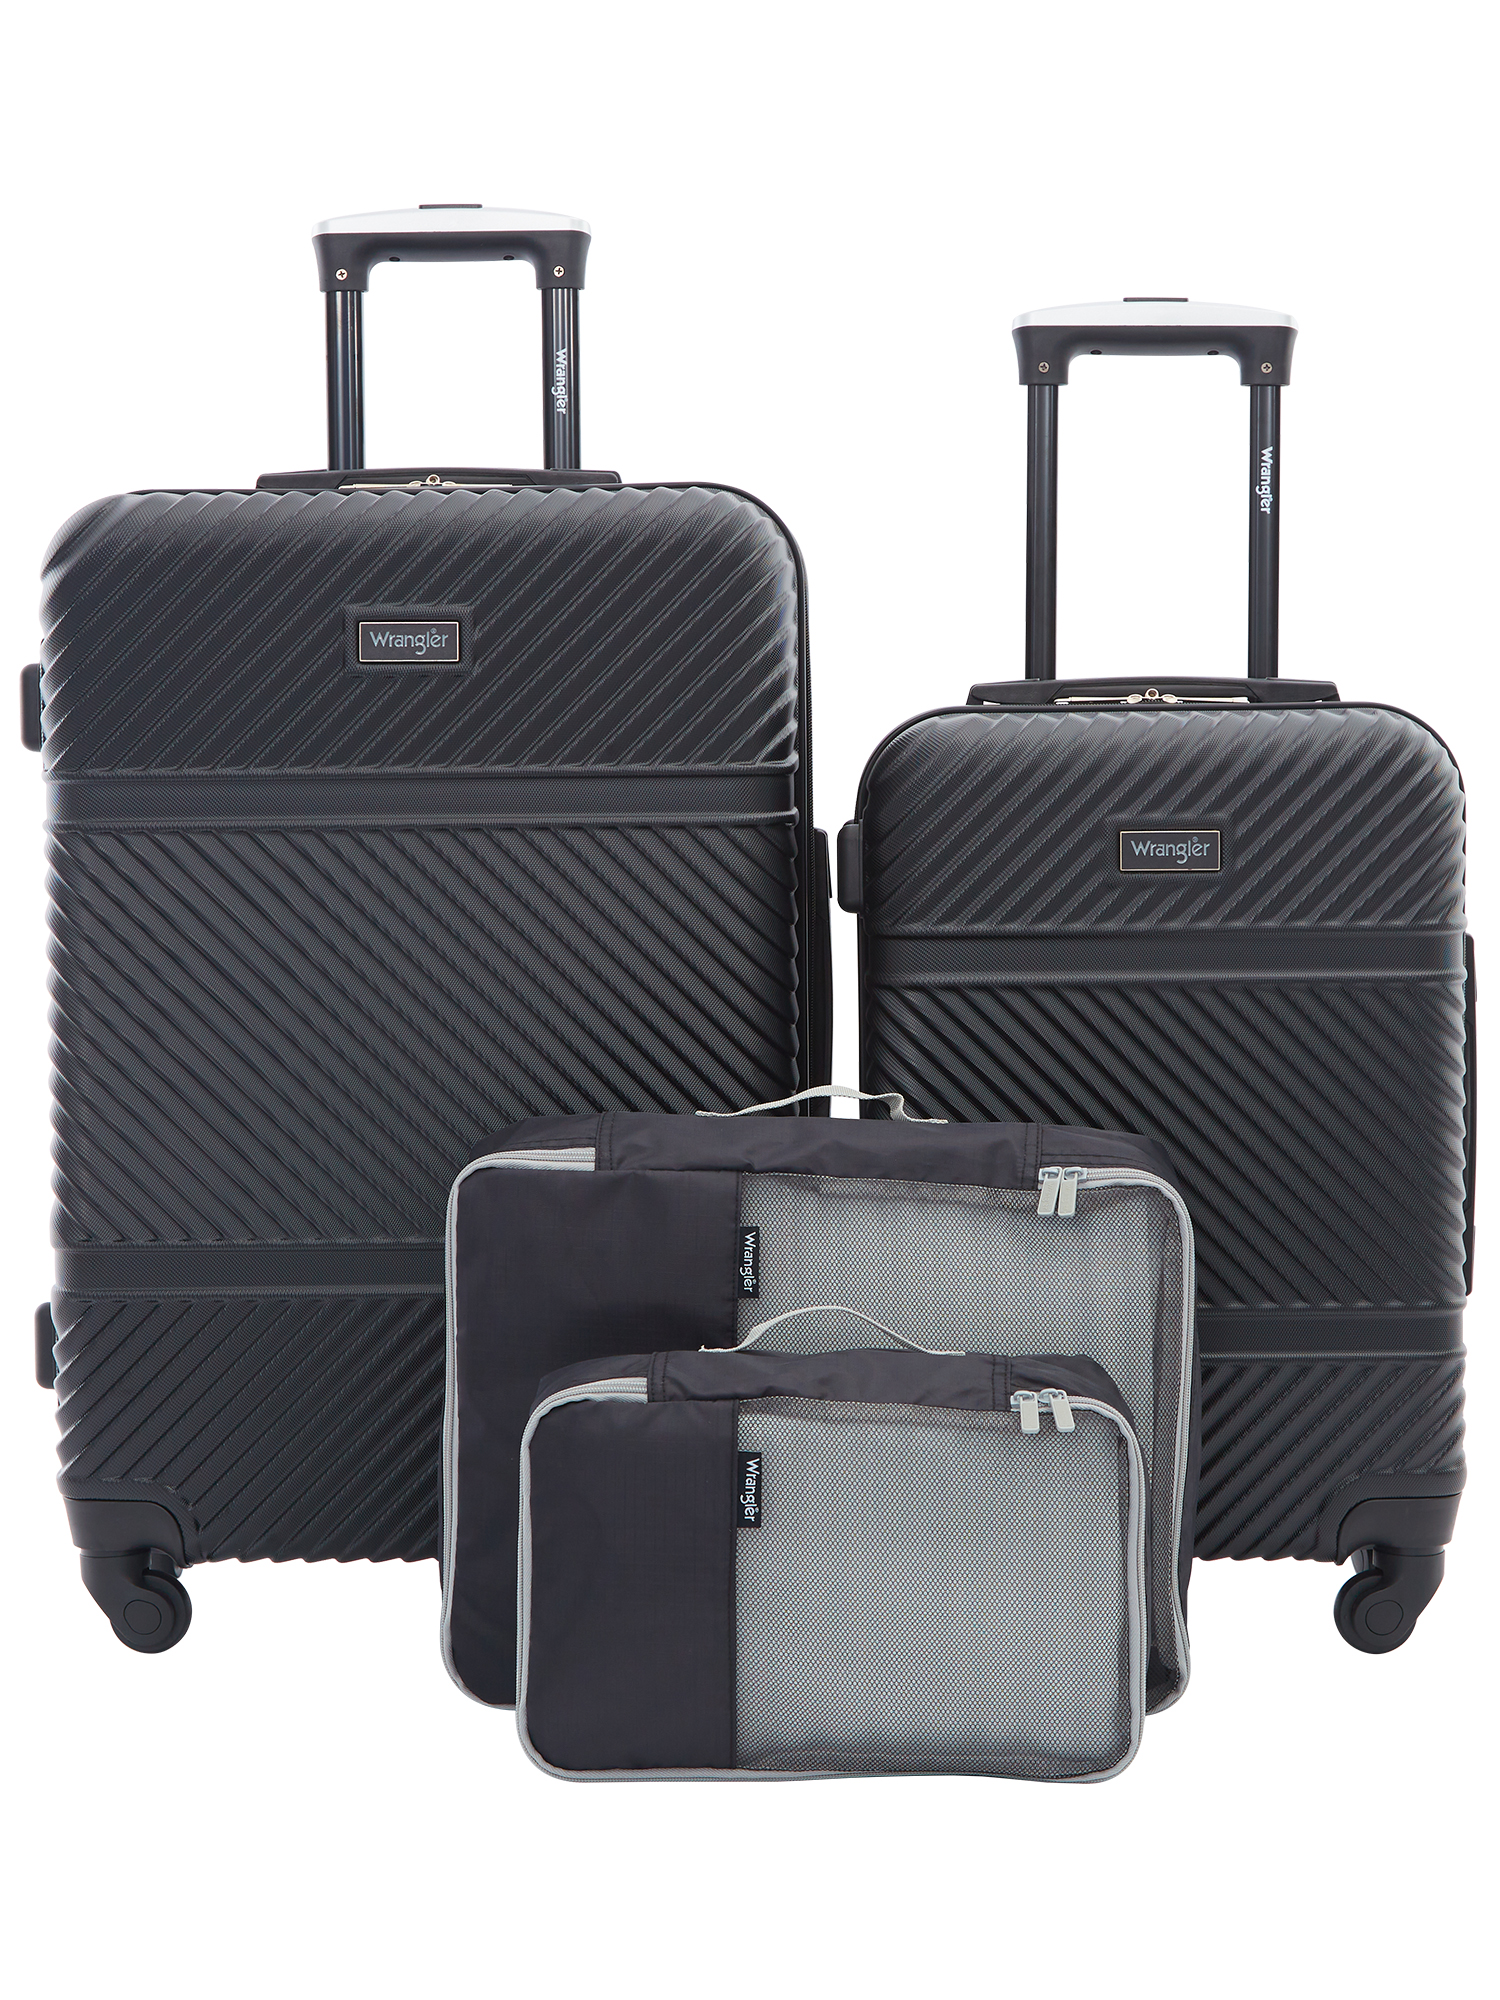 Wrangler 4 Pc Hardside Spinner Luggage Set with 20" & 25" Suitcases and Packing Cubes, Black - image 1 of 8